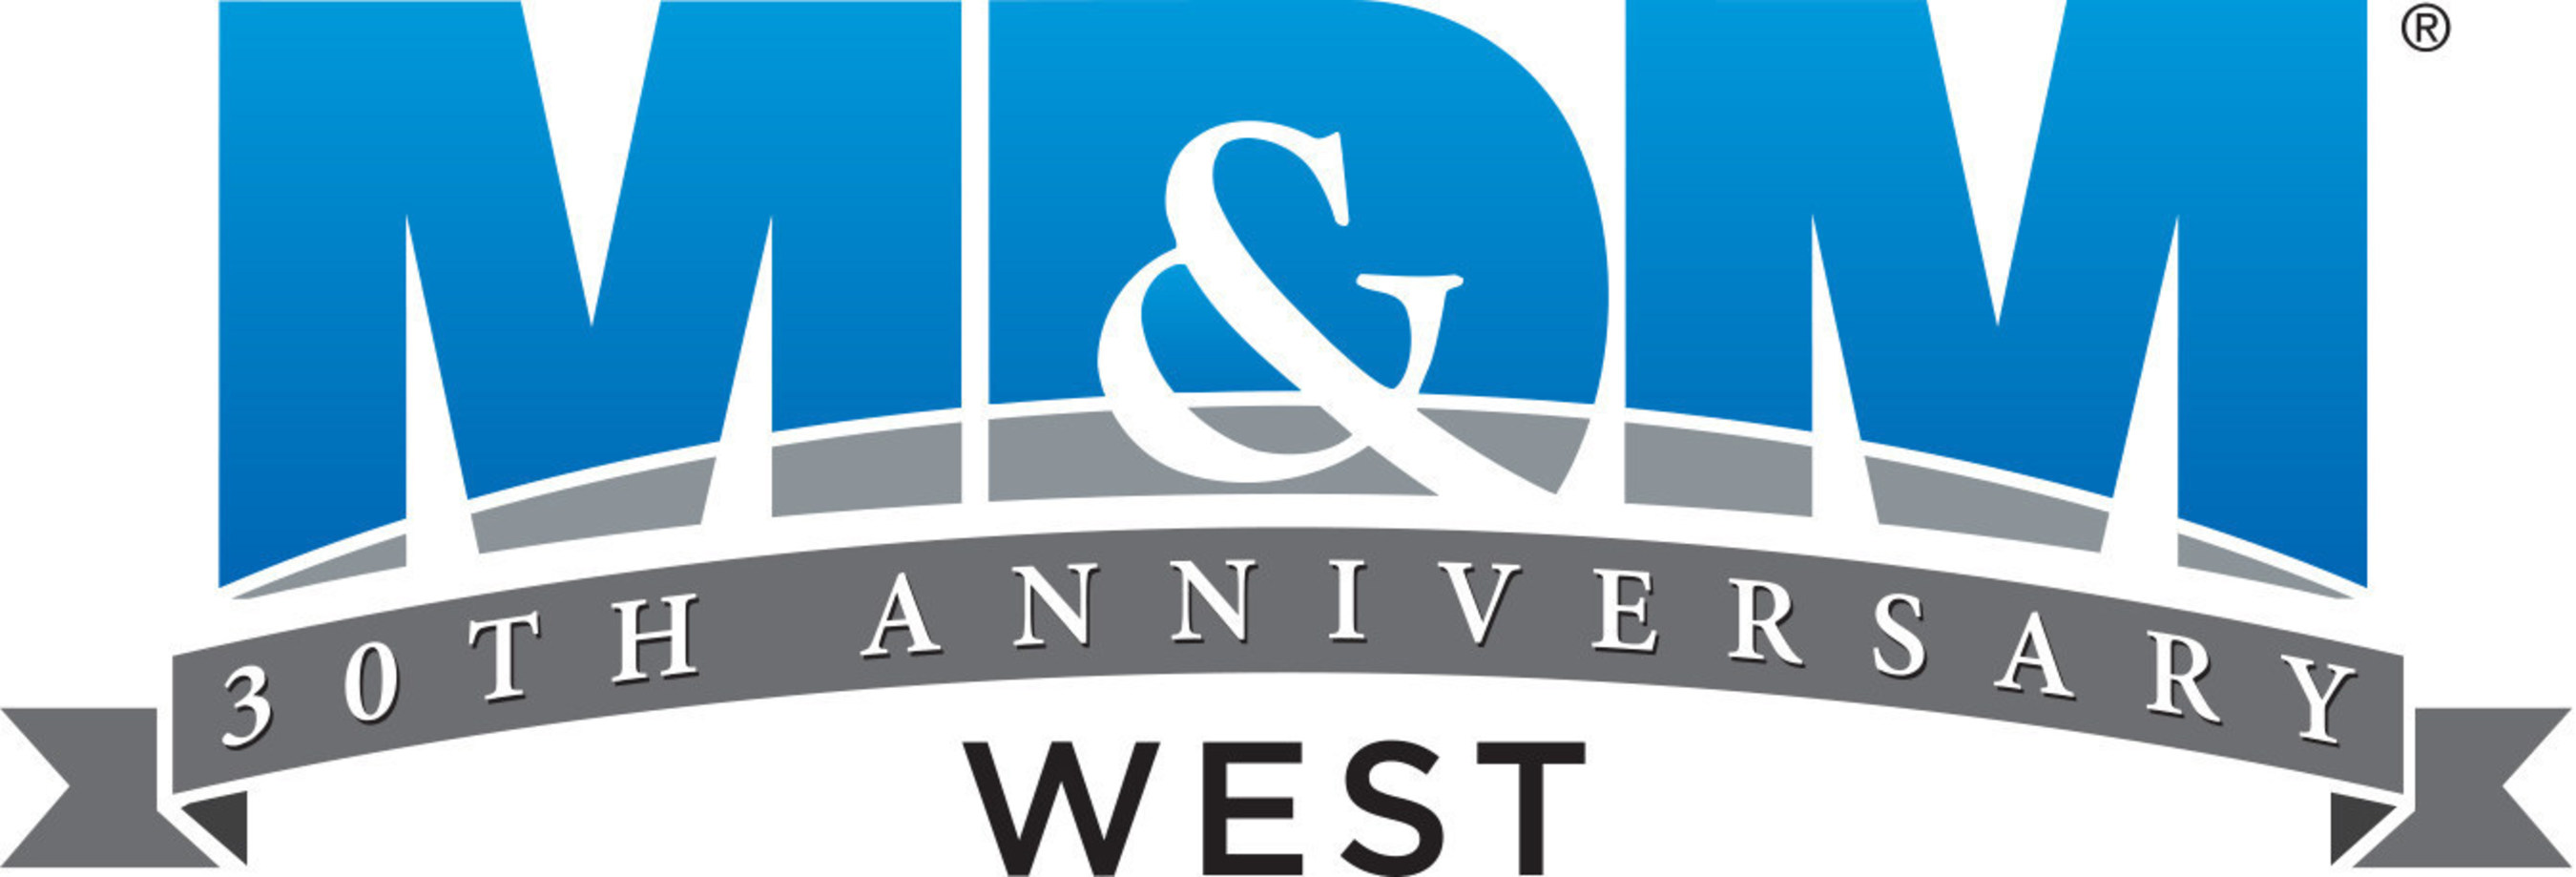 America's Largest Medtech Event, MD&M West, Celebrates 30th Anniversary February 10-12, 2015 at the Anaheim Convention Center in Anaheim, CA.